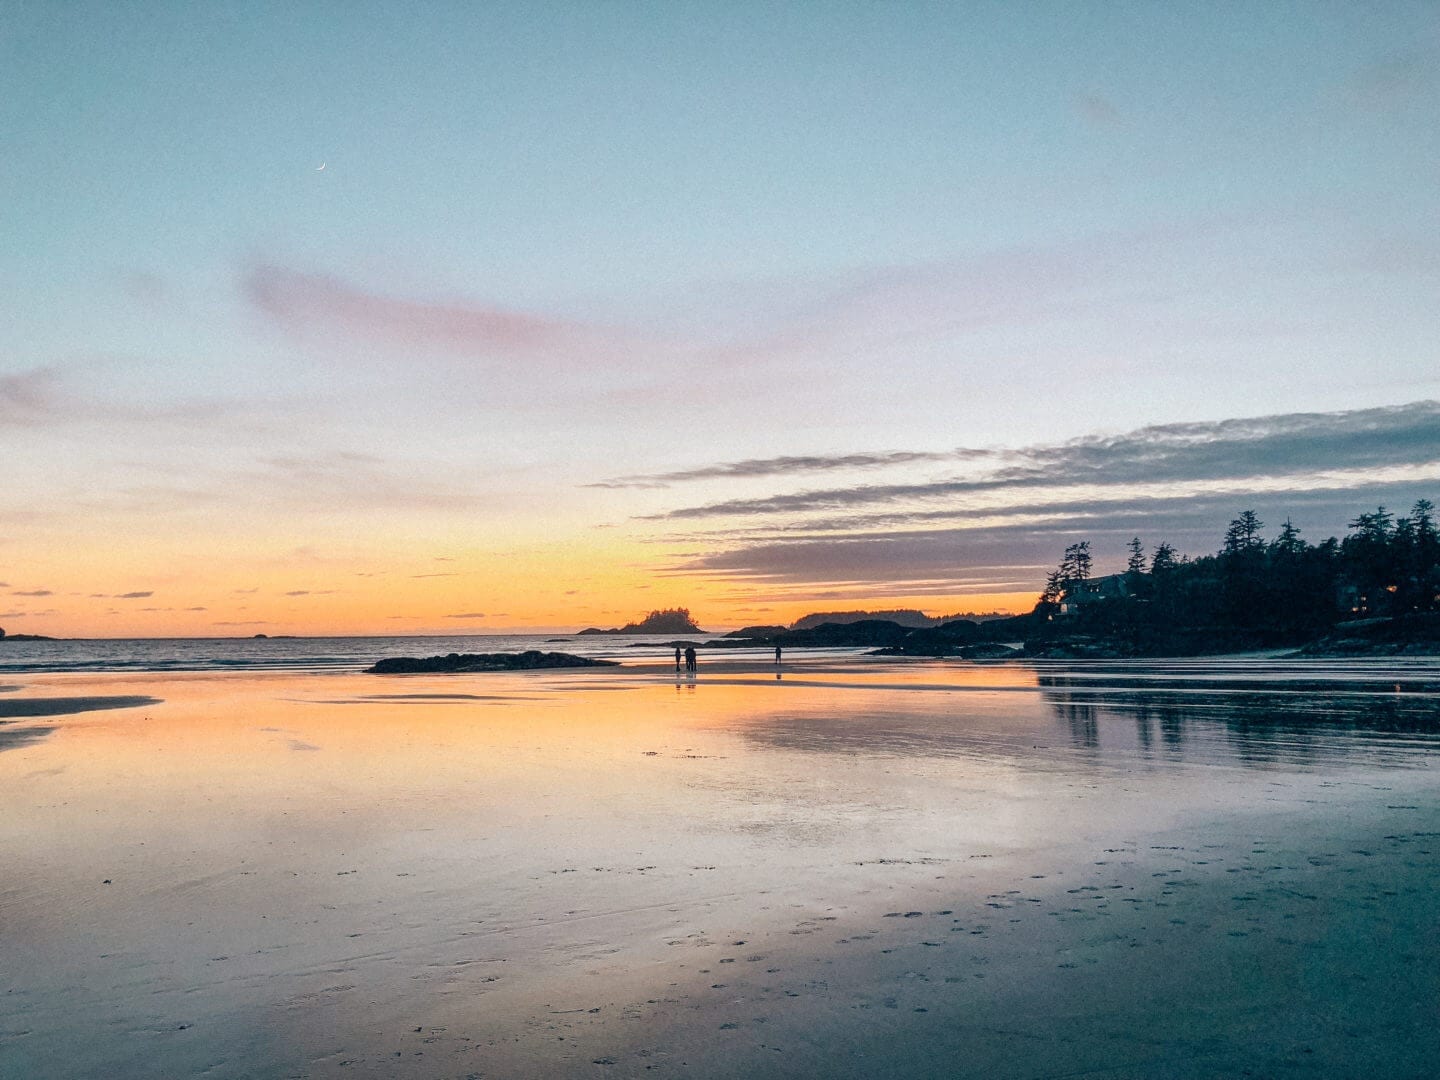 A yellow sunset in Tofino, BC reflections off the sand at the beach